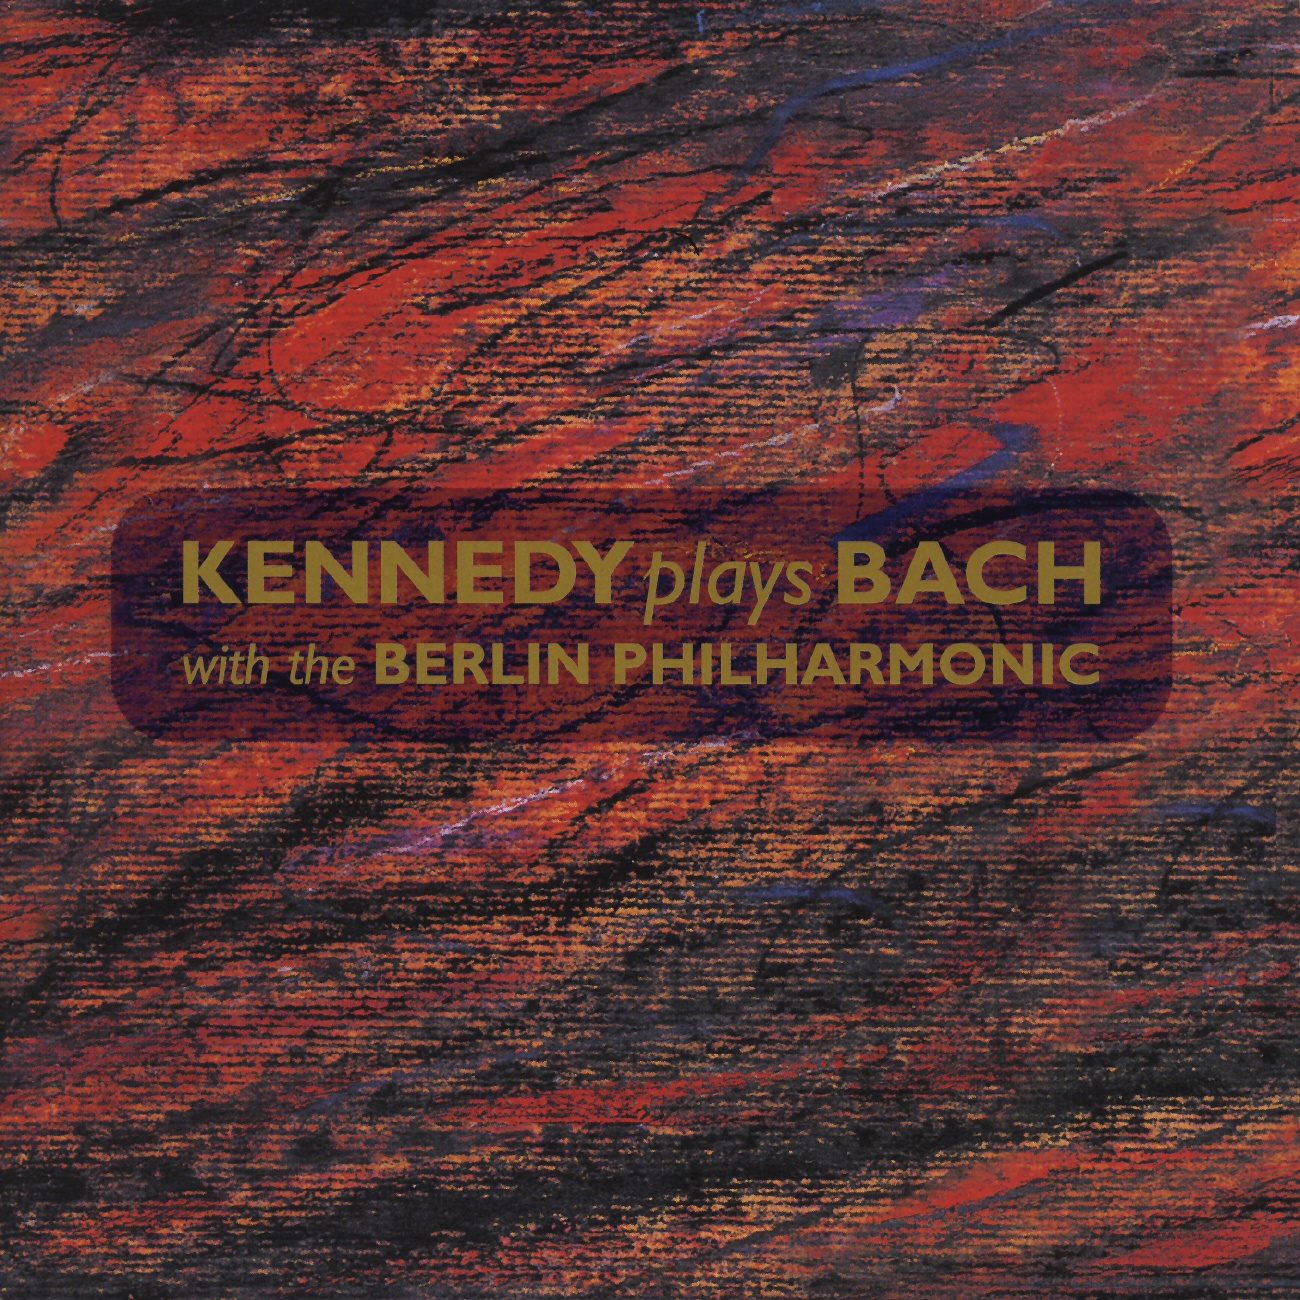 Kennedy plays Bach with the Berlin Philharmonic